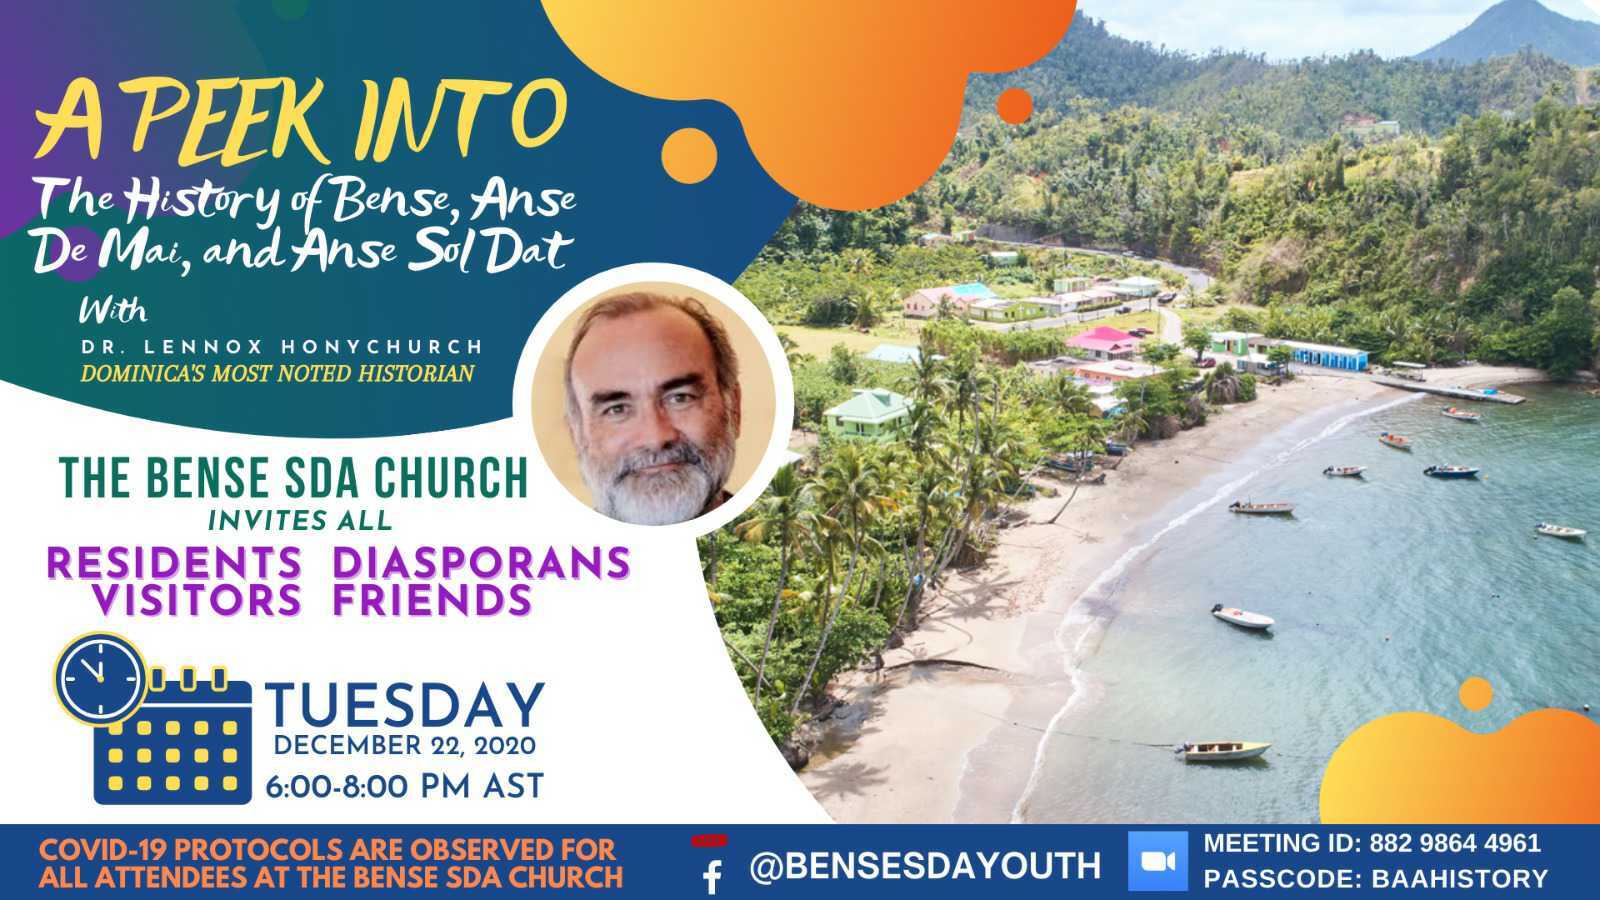 Announcement: History of Bense, Anse De Mai and Anse Sol Dat by Dr. Lennox Honychurch